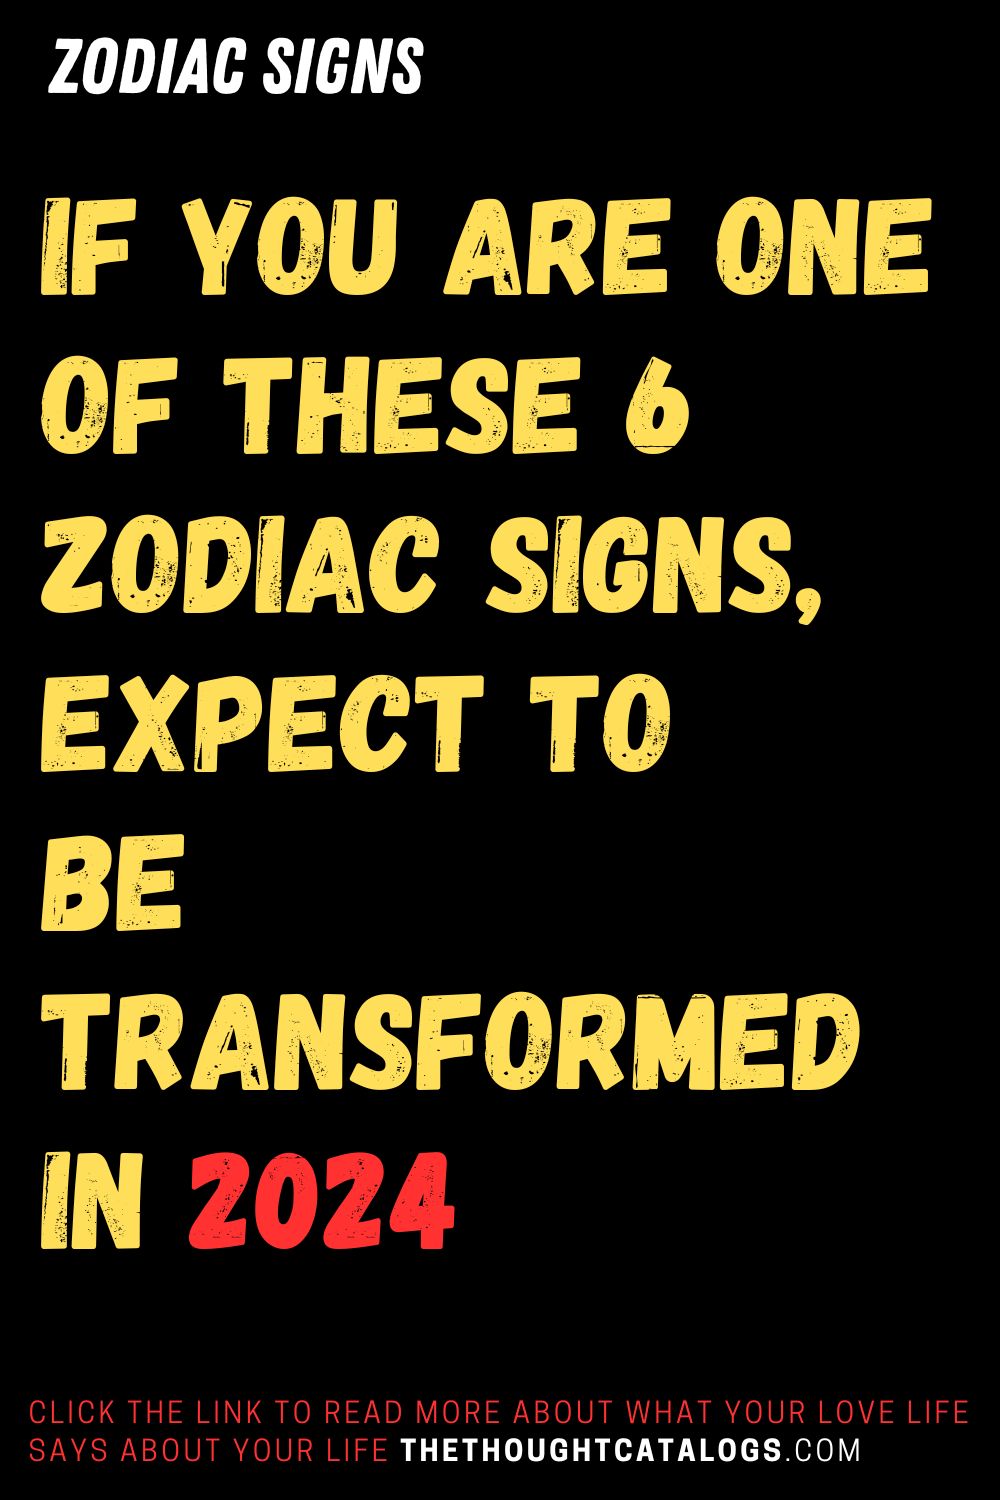 If You Are One Of These 6 Zodiac Signs, Expect To Be Transformed In 2024